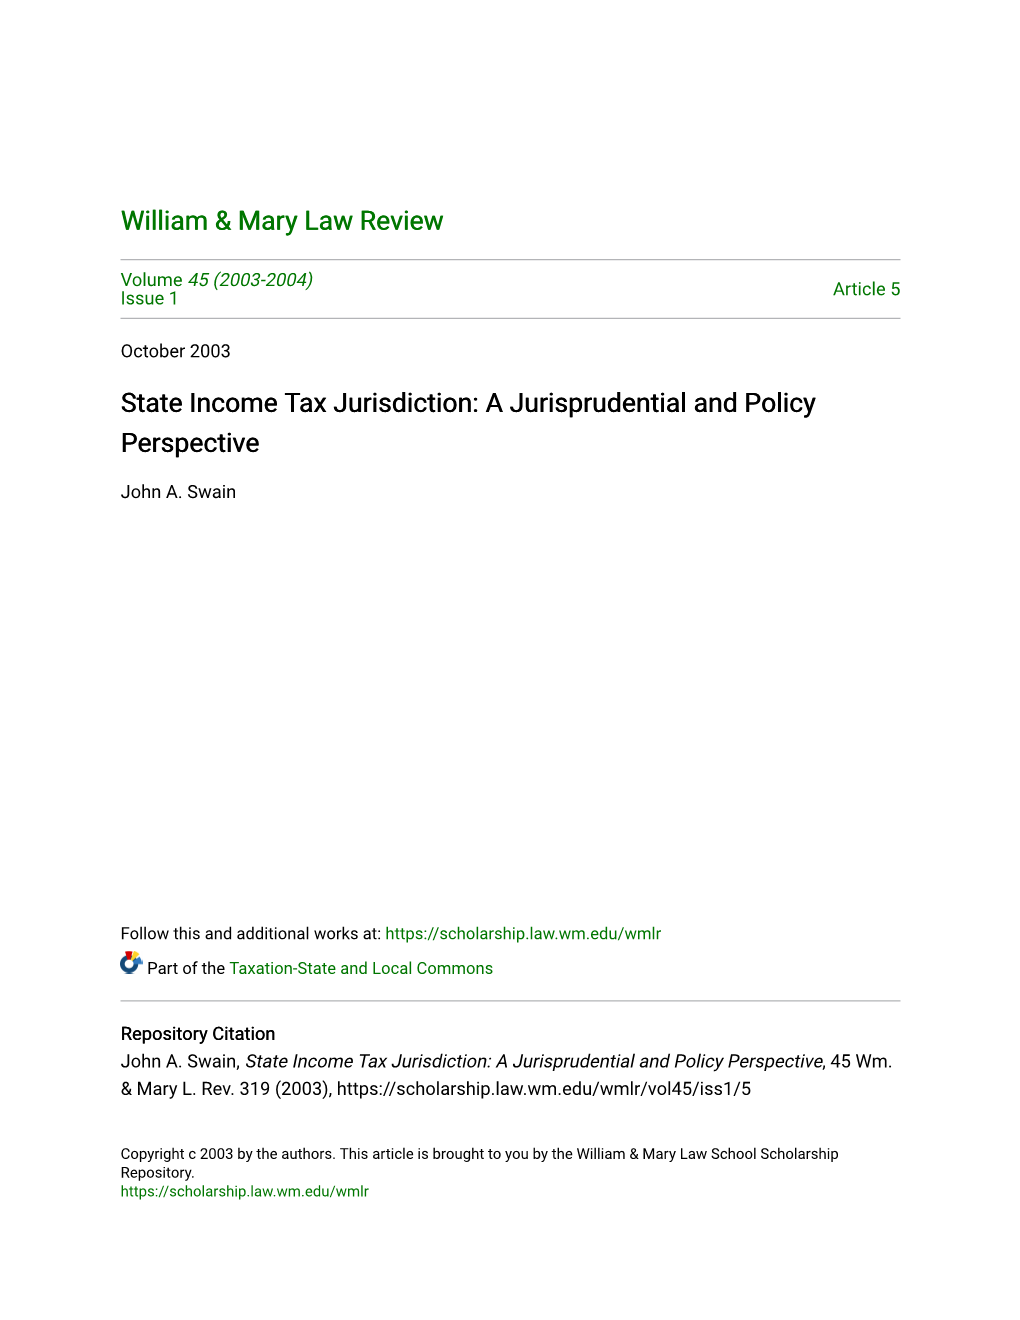 State Income Tax Jurisdiction: a Jurisprudential and Policy Perspective